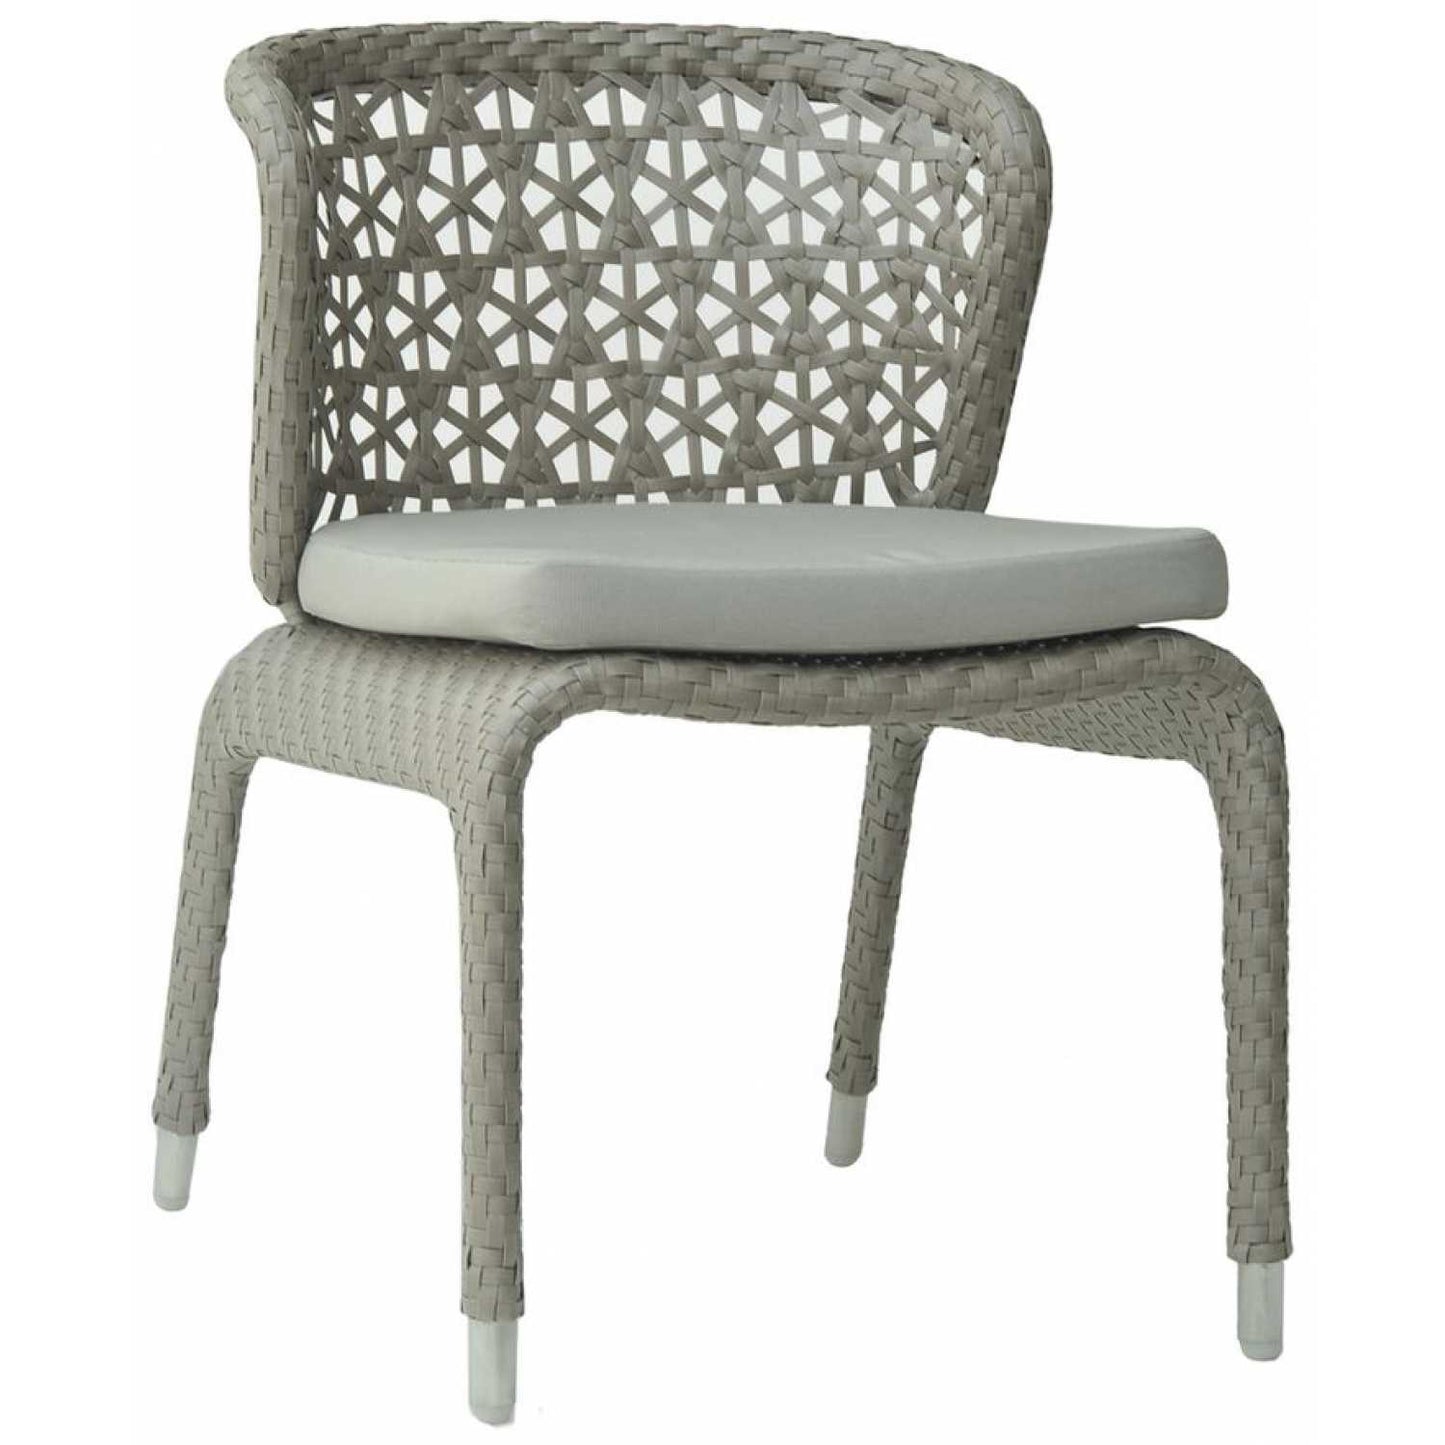 Journey Silver Walnut Dining Chair - PadioLiving - Journey Silver Walnut Dining Chair - Outdoor Dining Chair - Silver Walnut 10mm Weave - Perla (£488) - PadioLiving